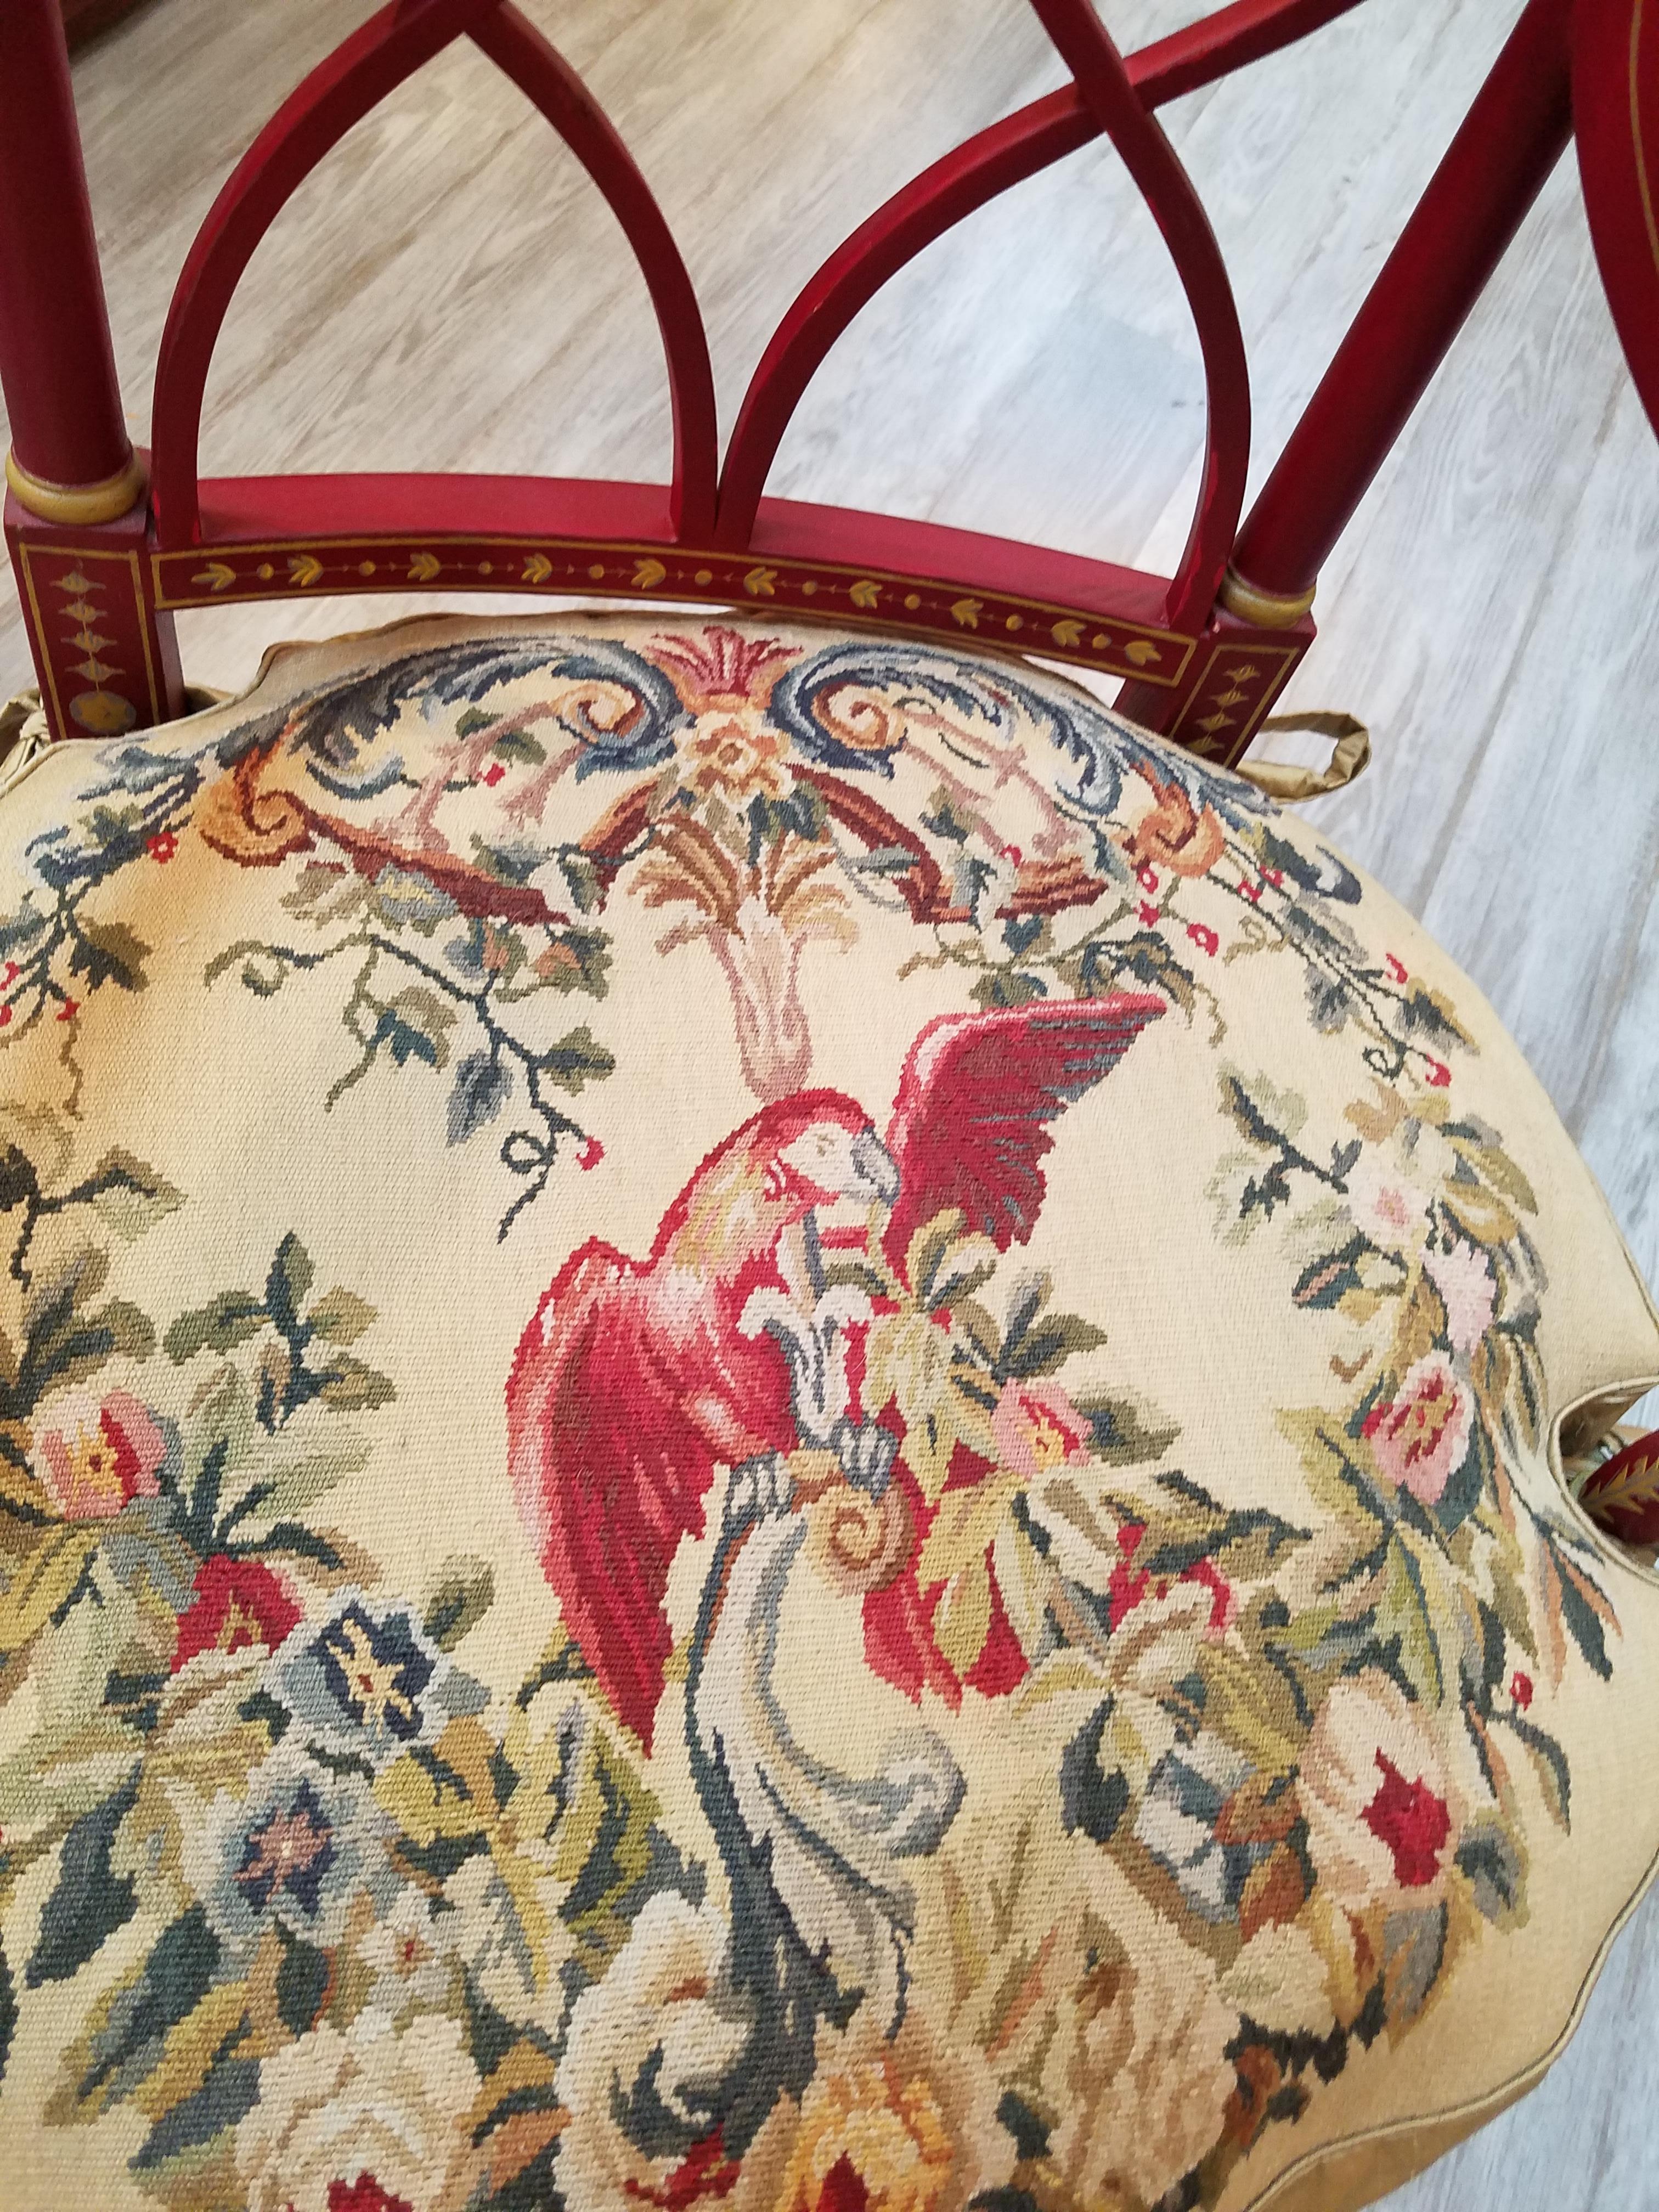 Elegant hand painted Regency style armchair with wool needlepoint seat cushion. The Chinese red background with gold hand painted details all-over. The cushion with a hand done needlepoint and silk backed seat cushion depicting a red parrot with